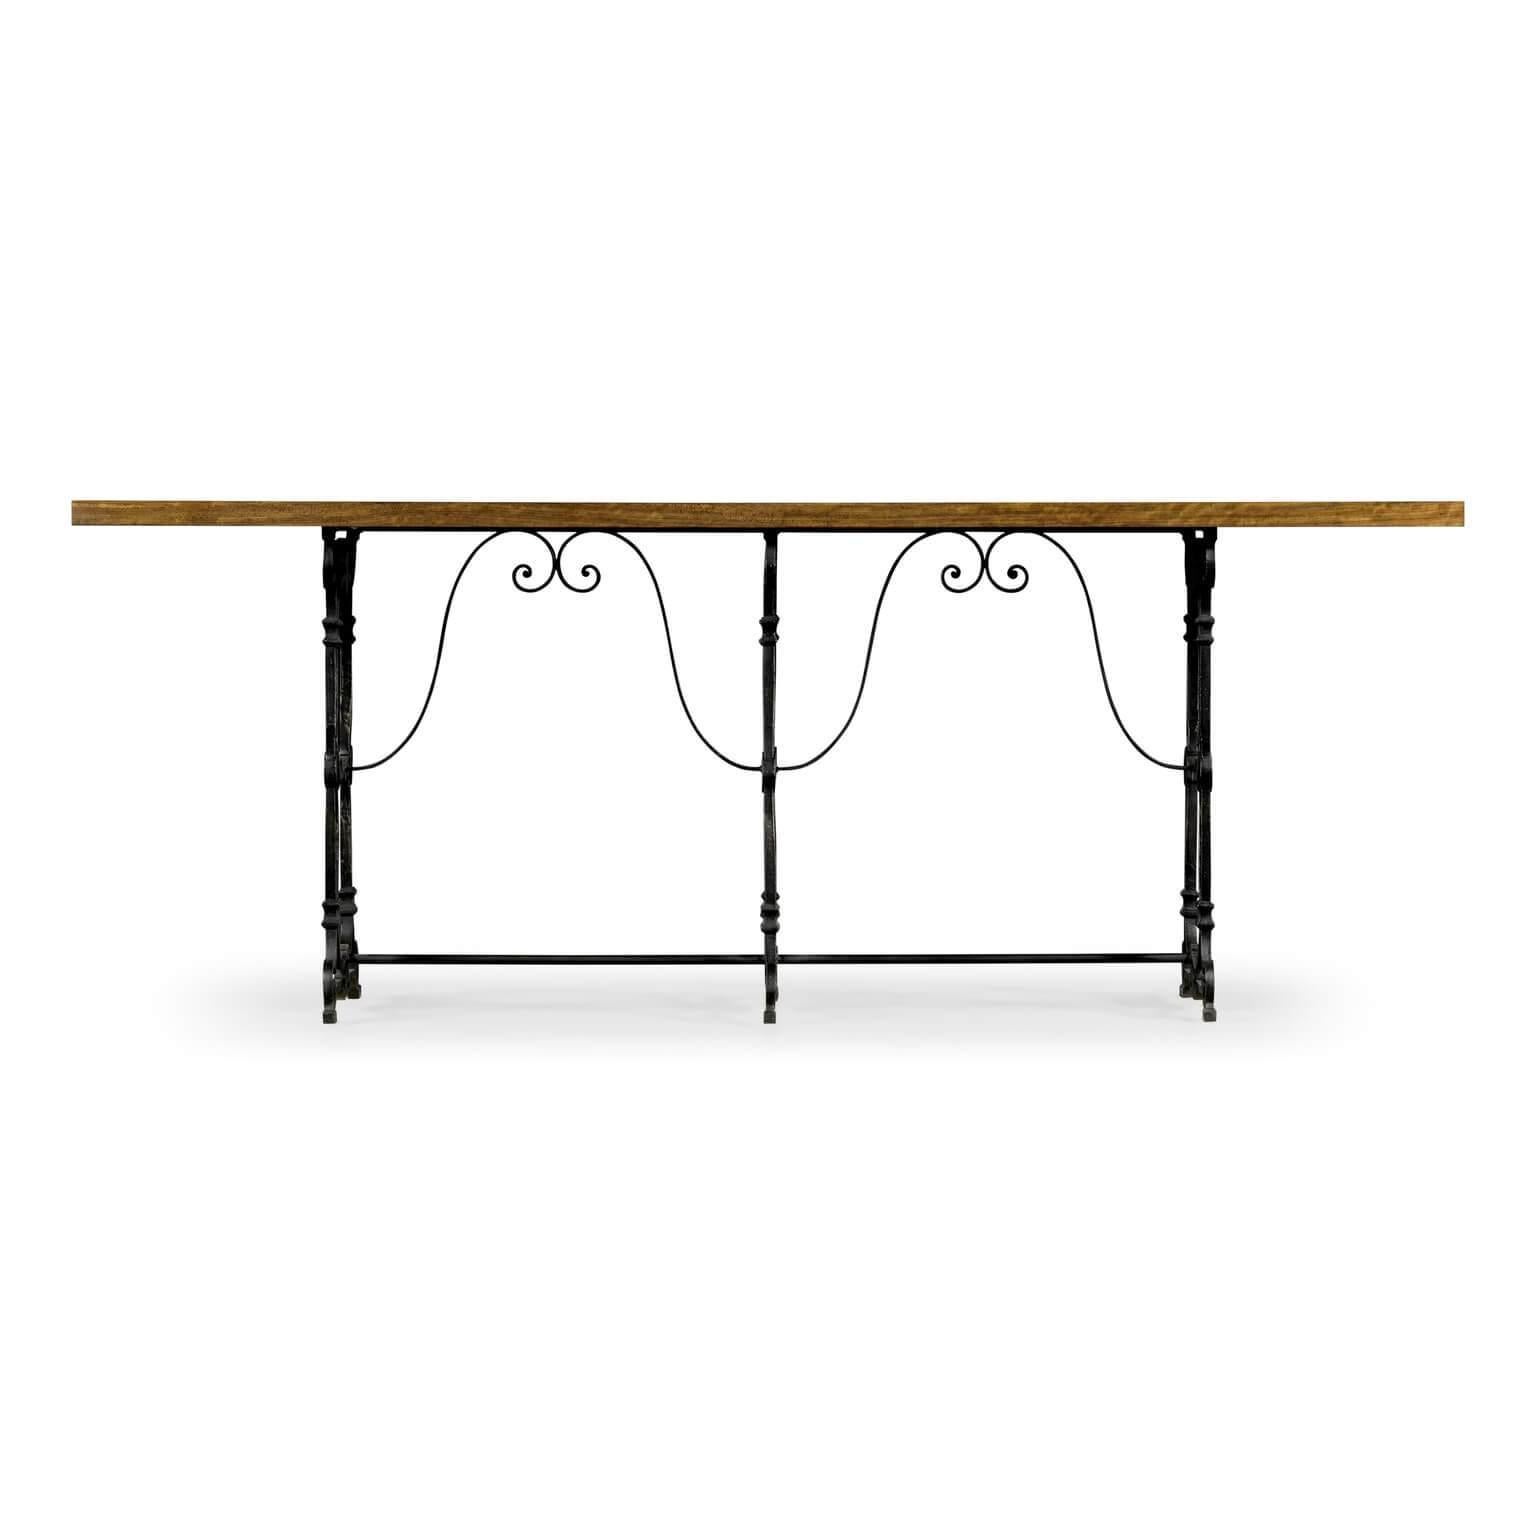 French Caledonia burl wood and wrought iron console table.

Dimensions: 84